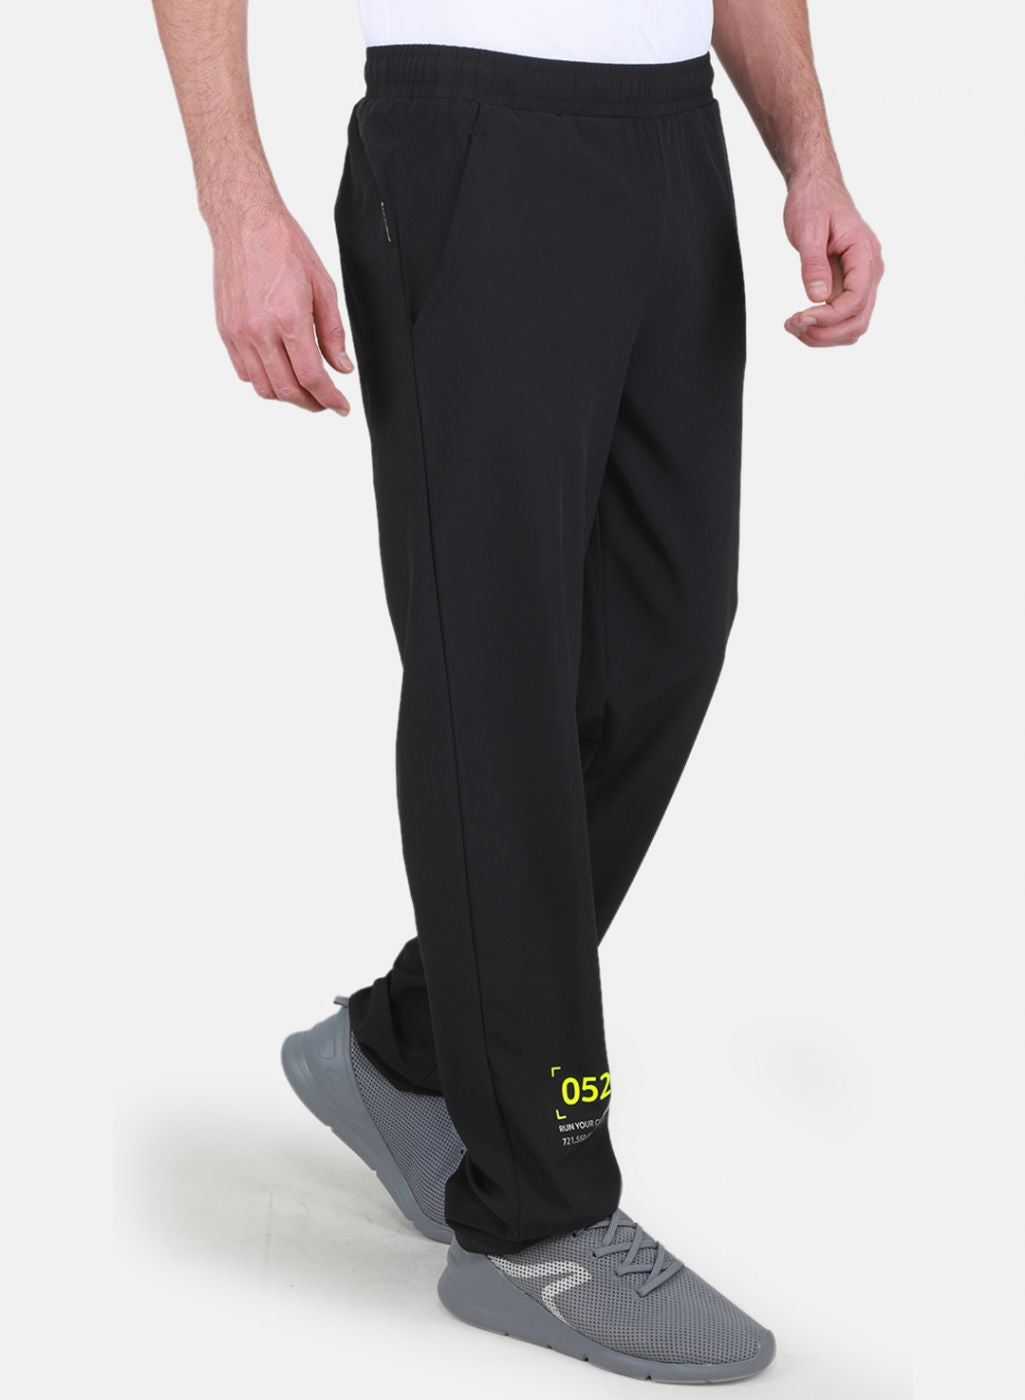 District Vision Zanzie Track Pant in Black – The DöRR Hotel Store